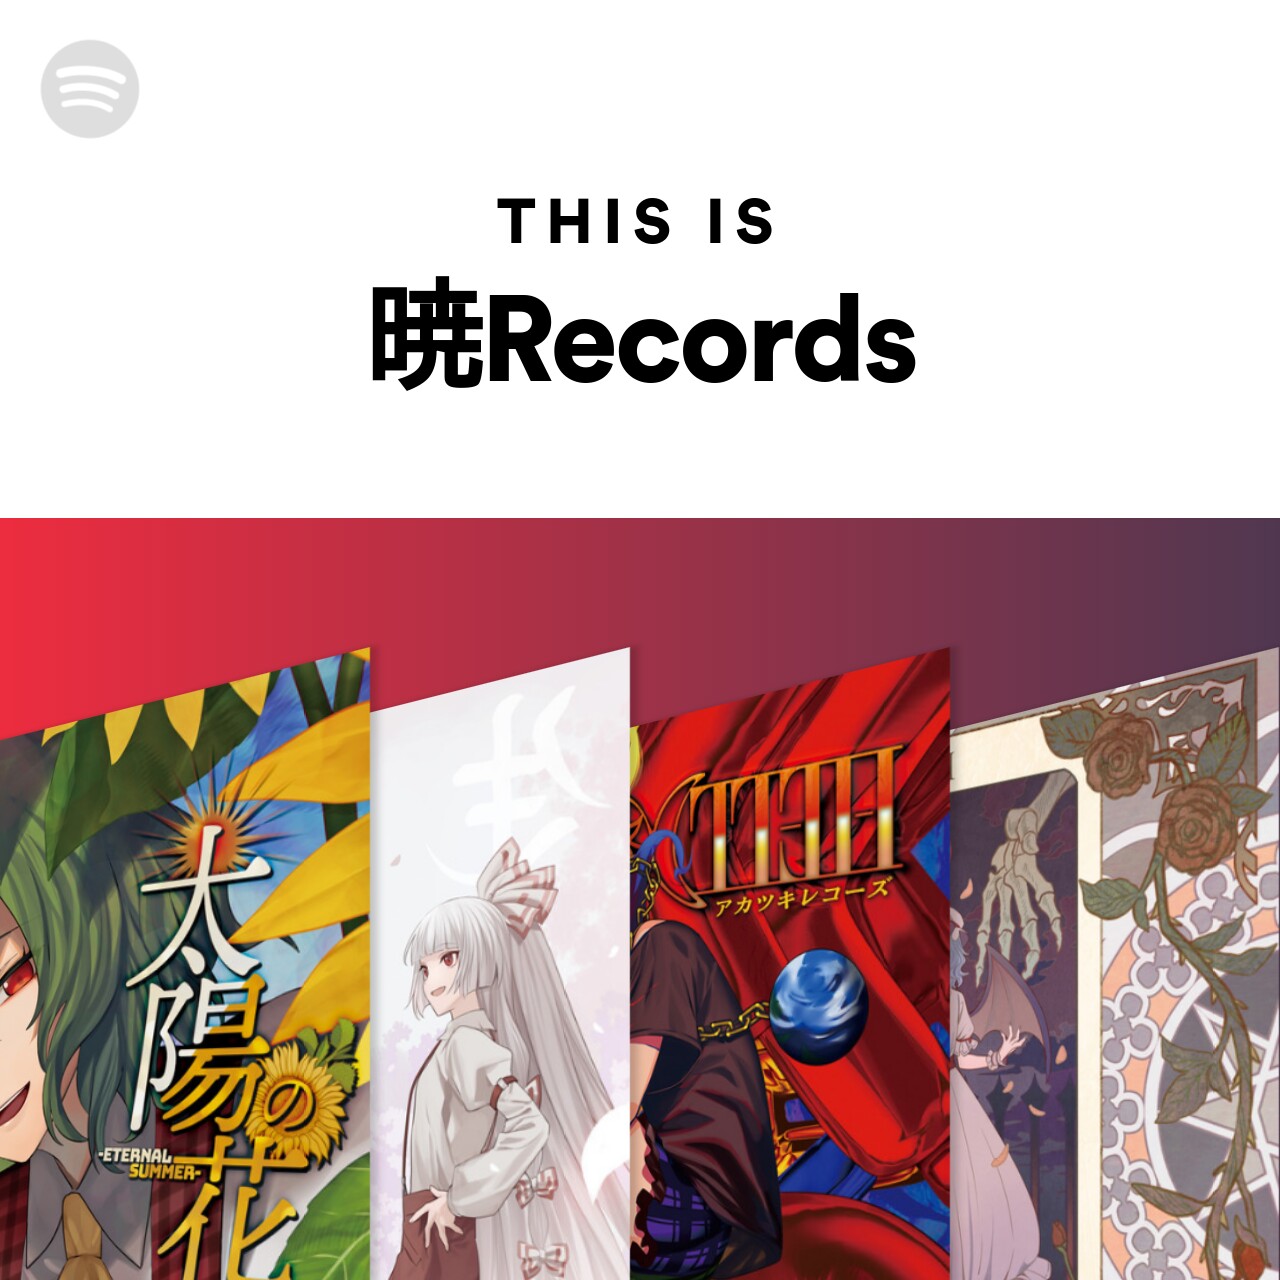 This Is 暁Records